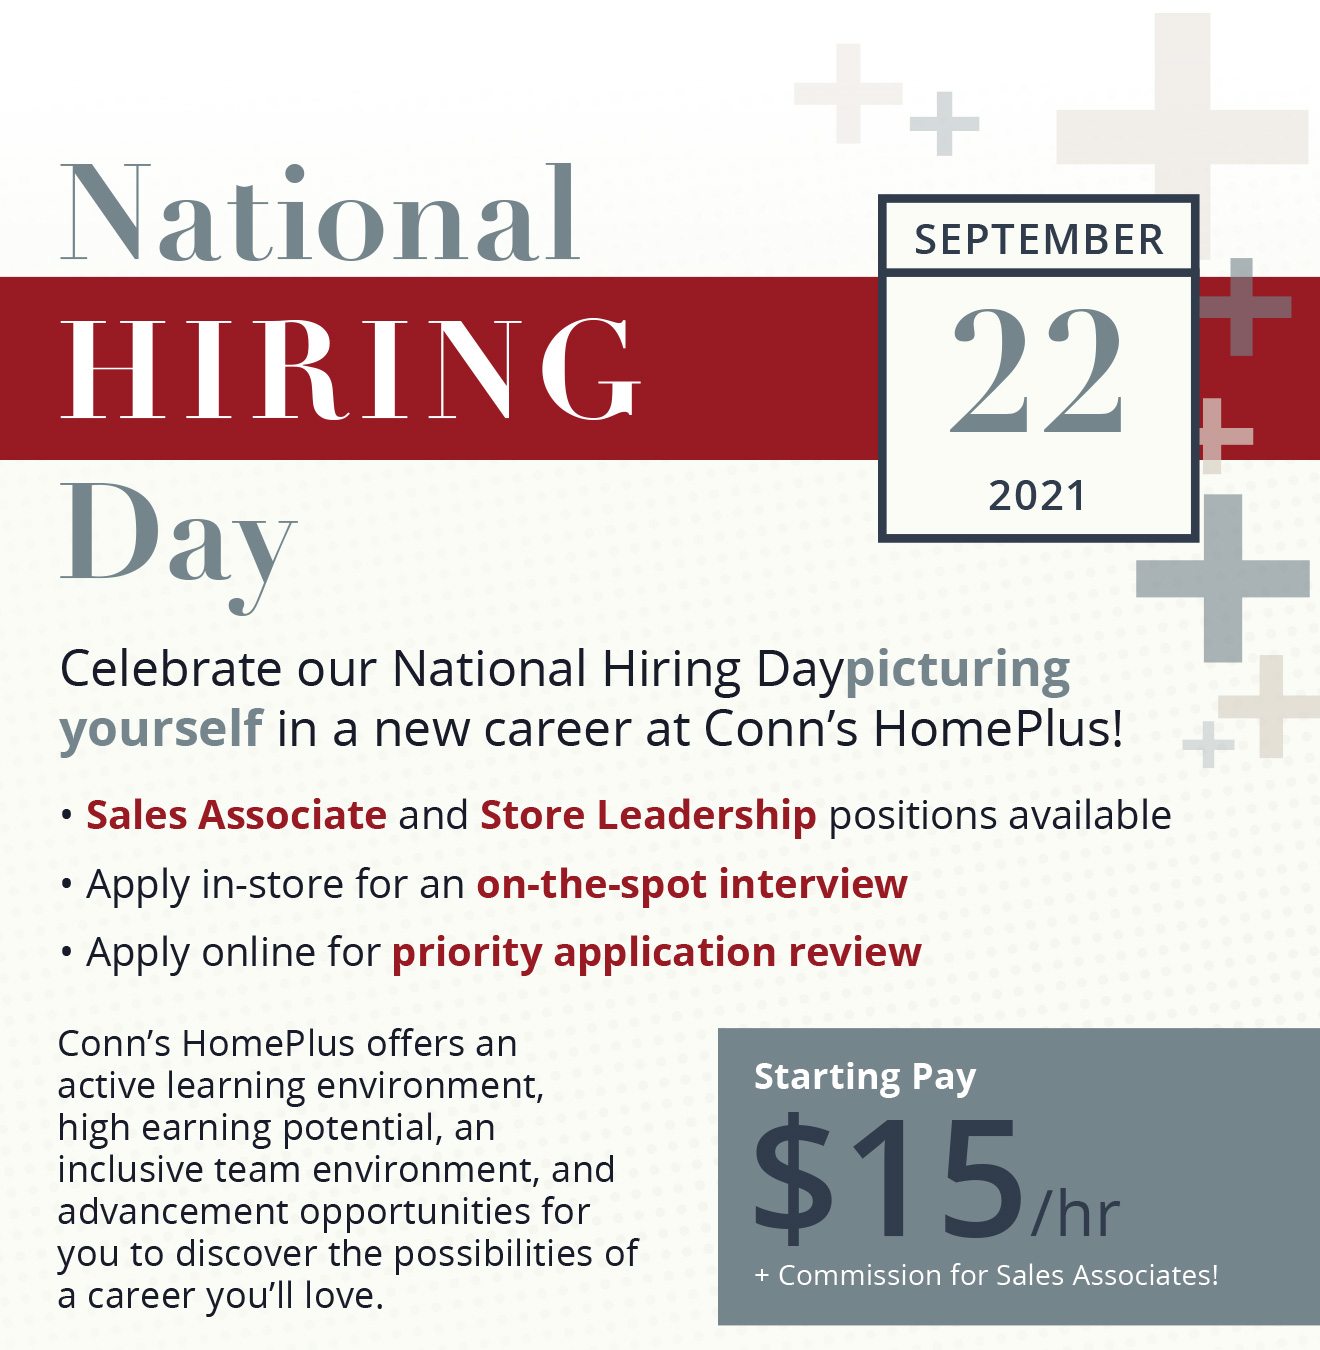 National Hiring Day September 22, 2021 - Celebrate our National Hiring Daypicturing yourself in a new career at Conn’s HomePlus! Sales Associate and Store Leadership positions available - Apply in-store for an on-the-spot interview - Apply online for priority application review - Conn’s HomePlus offers an active learning environment, high earning potential, an inclusive team environment, and advancement opportunities for you to discover the possibilities of a career you’ll love. Starting Pay $15/hr + Commission for Sales Associates!